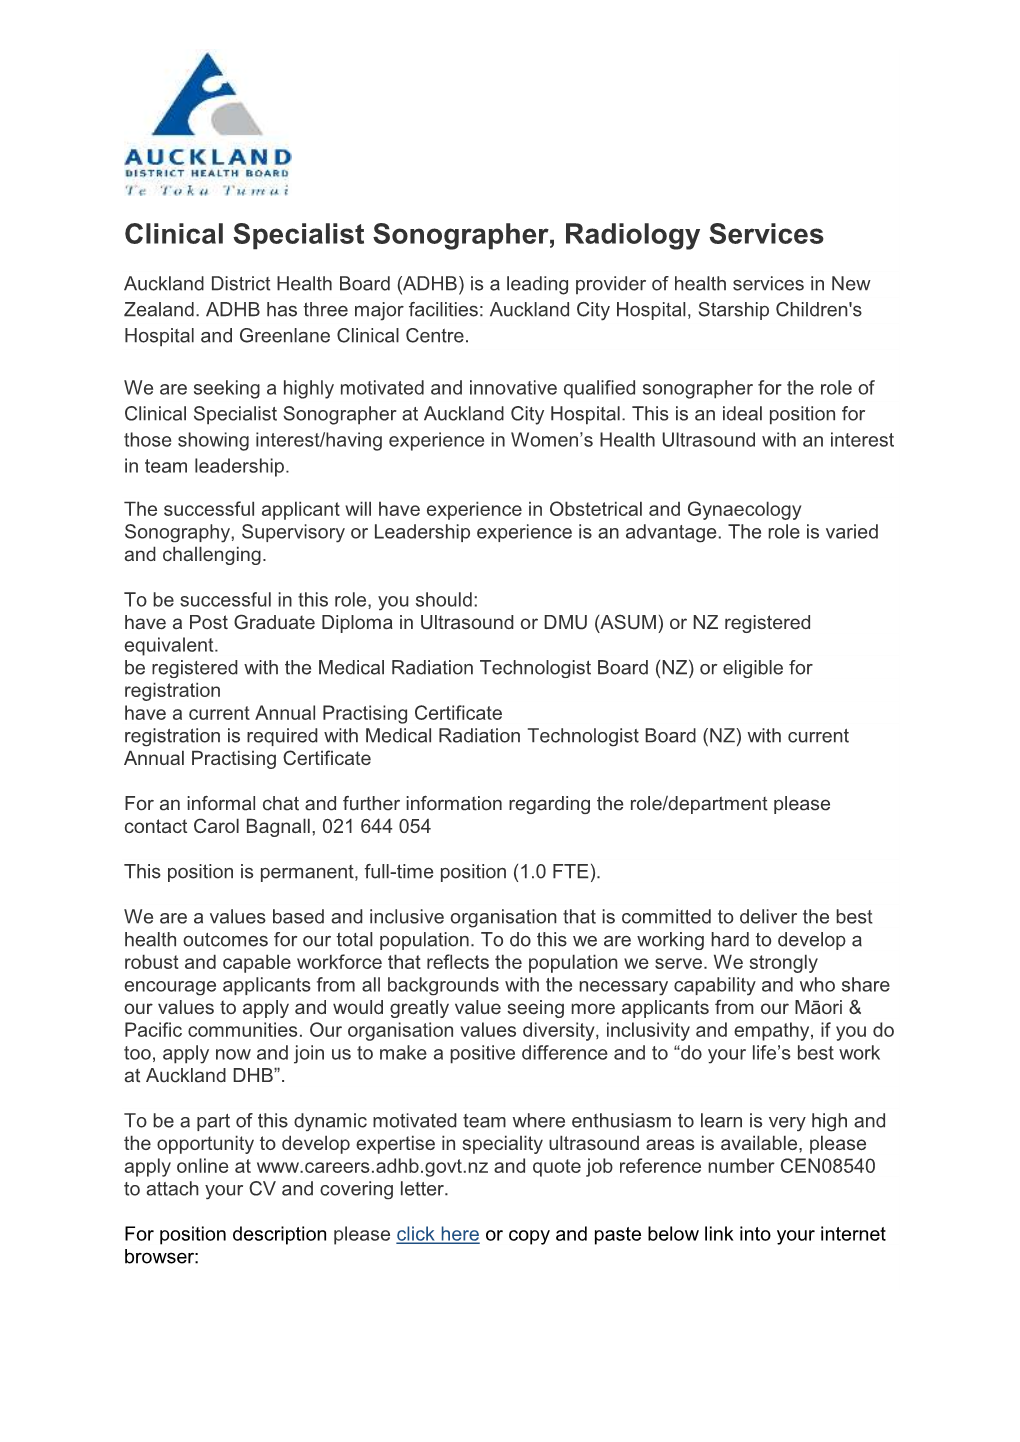 Clinical Specialist Sonographer, Radiology Services